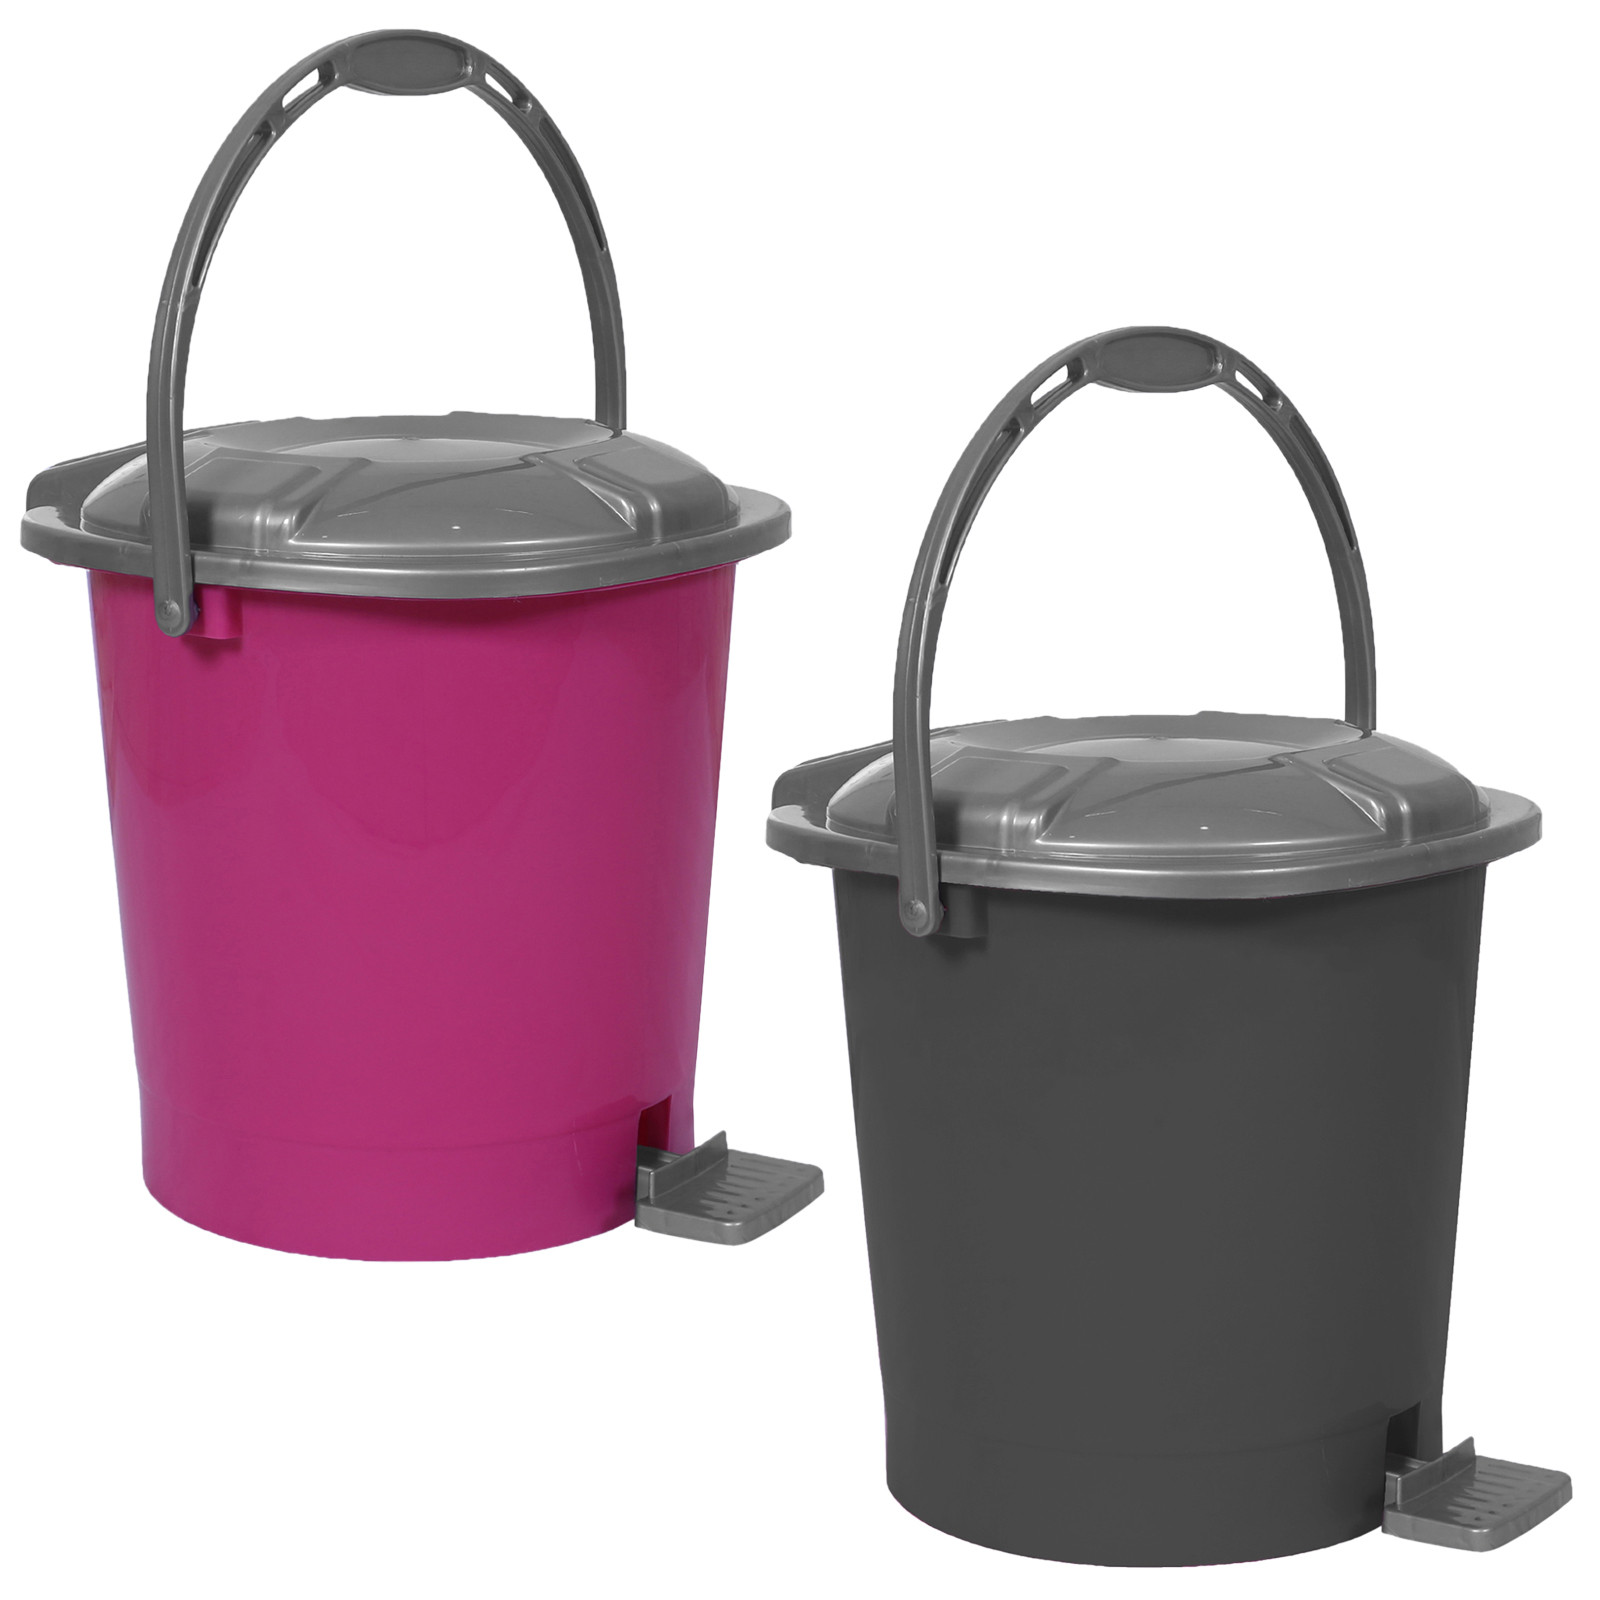 Kuber Industries Durable Plastic Pedal Dustbin|Waste Bin|Trash Can For Kitchen & Home With Handle,7 Litre,Pack of 2 (Pink & Gray)